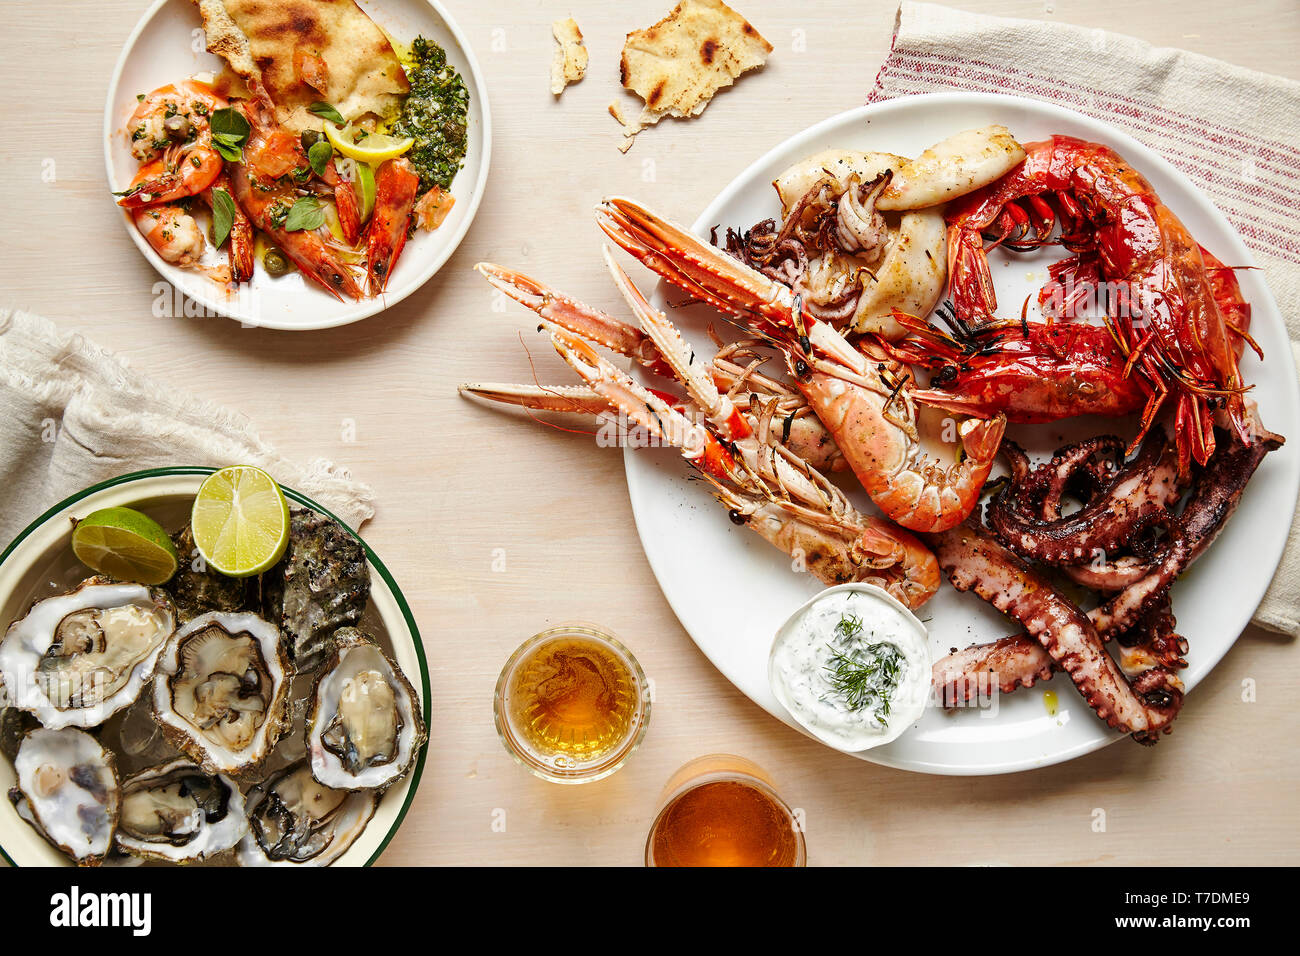 Tablescape featuring platters of fresh seafood and flatbread Stock Photo